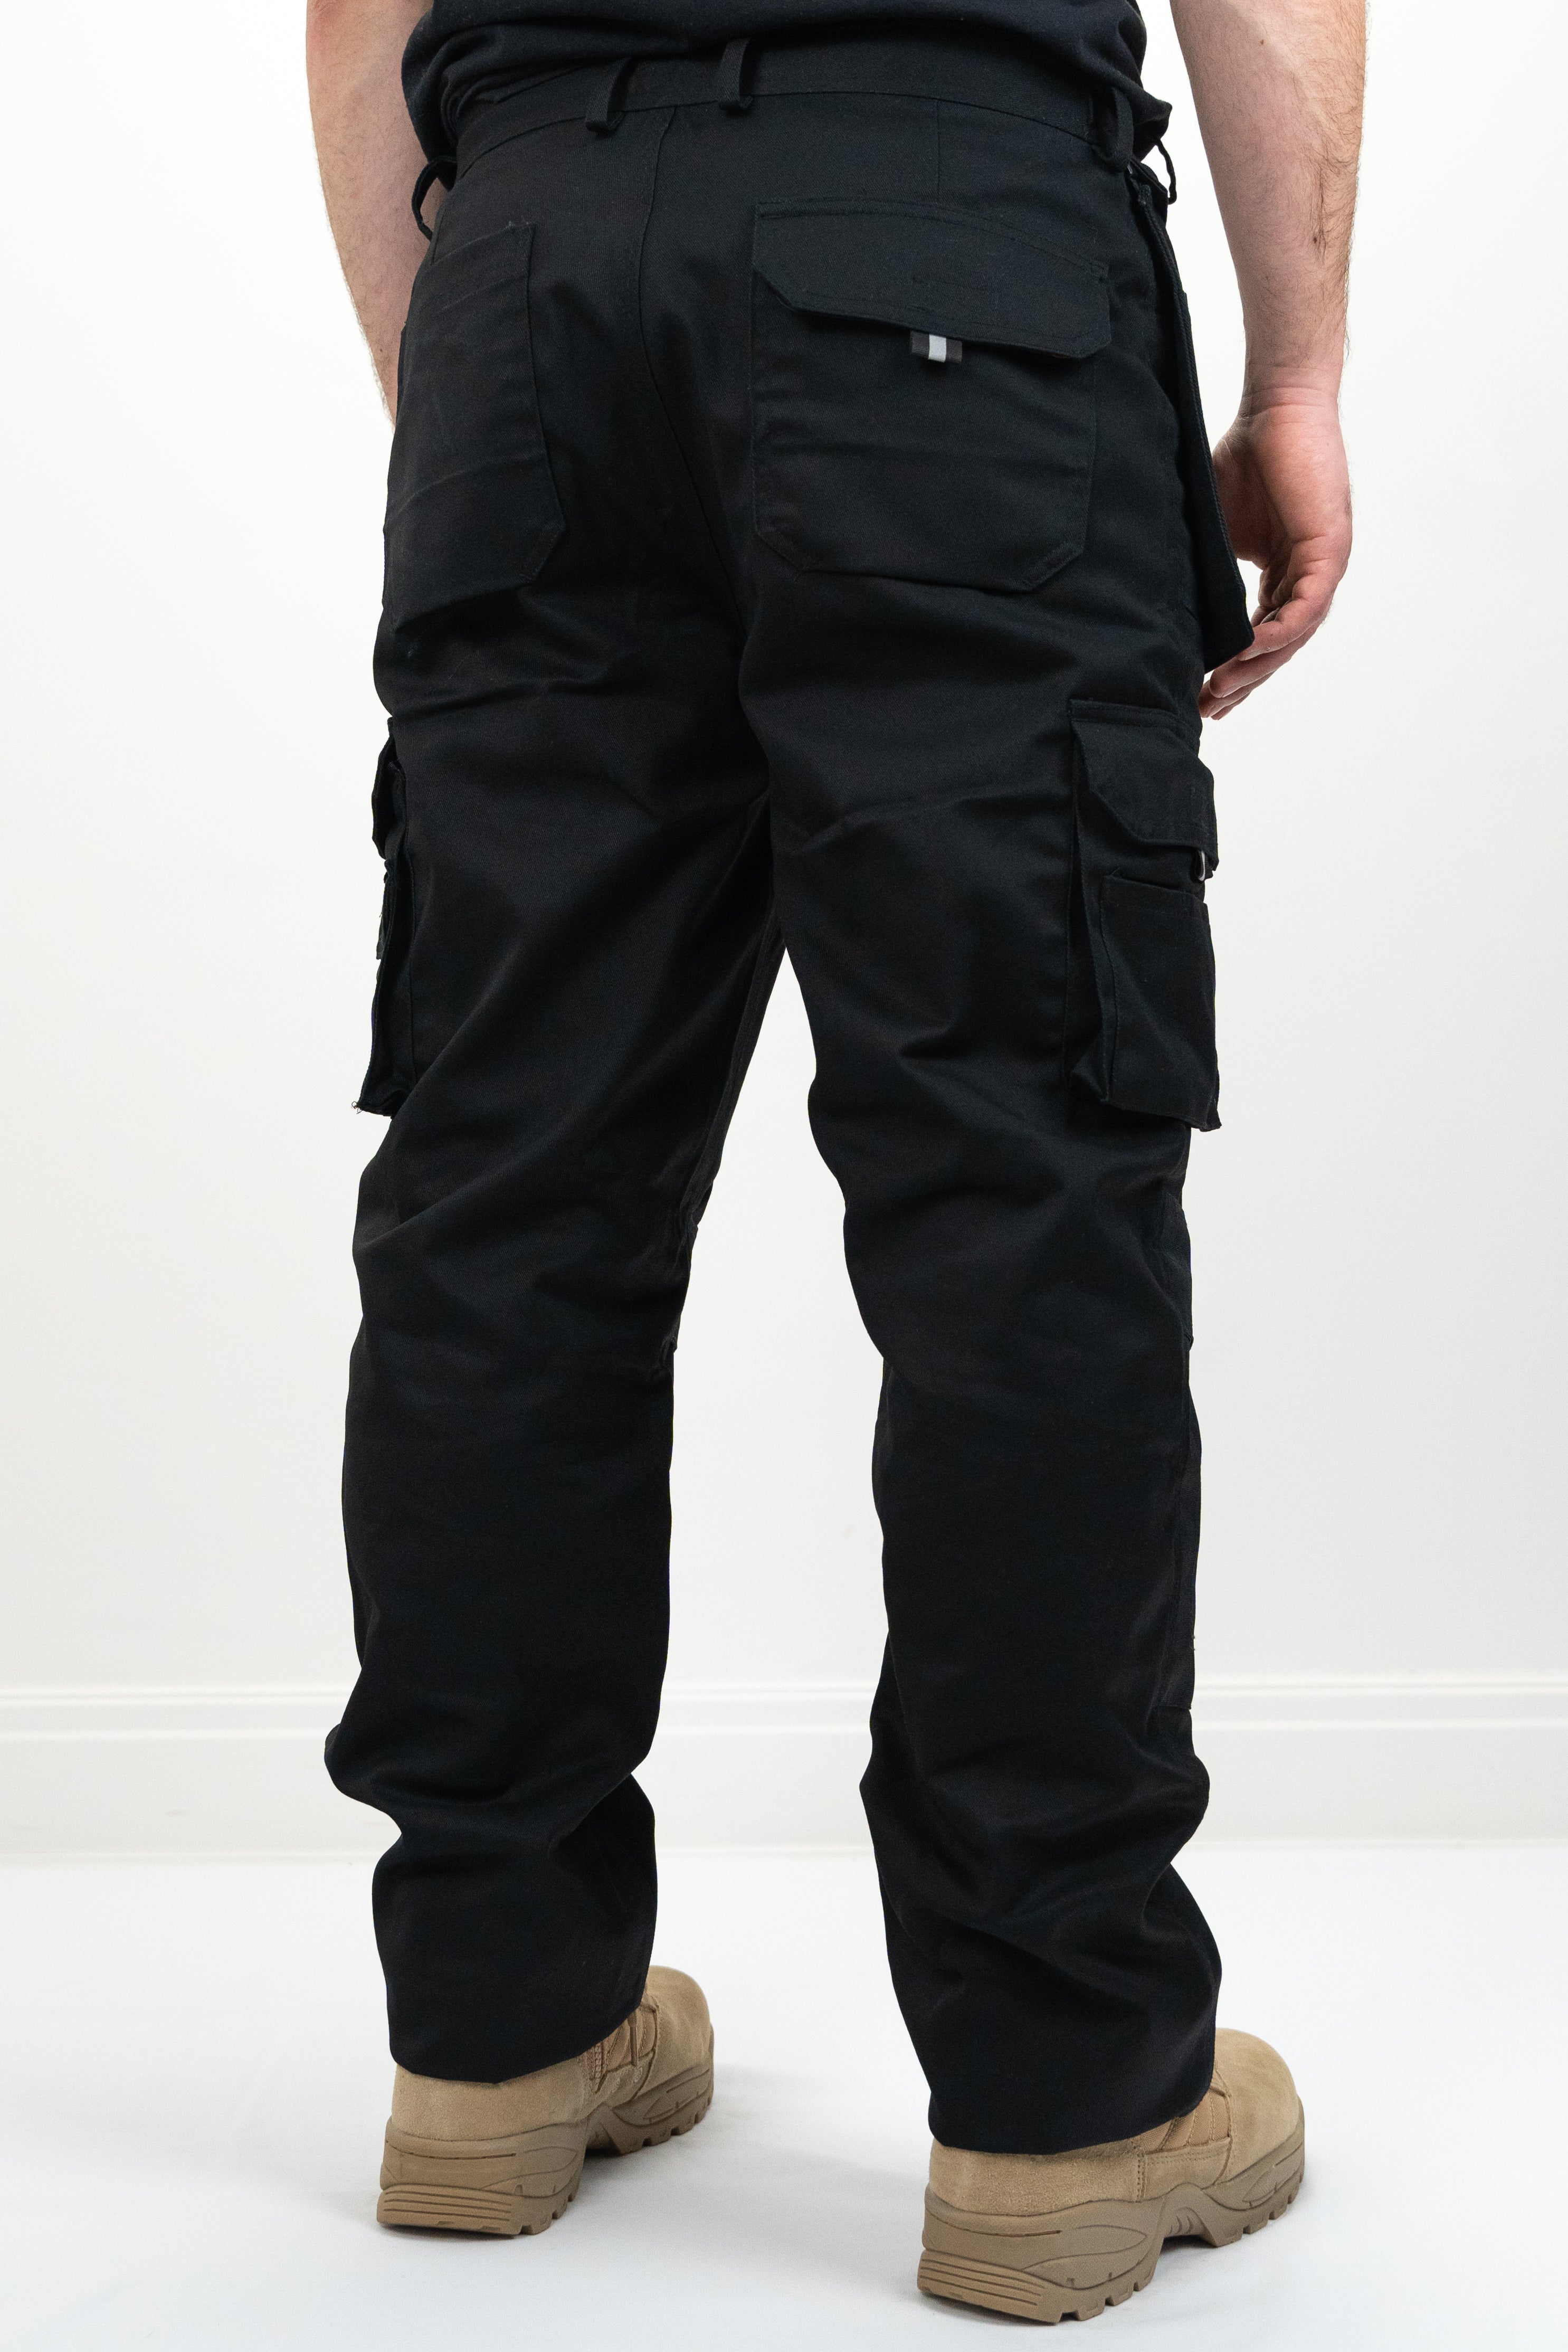 rear view of black work trousers with two rear pockets